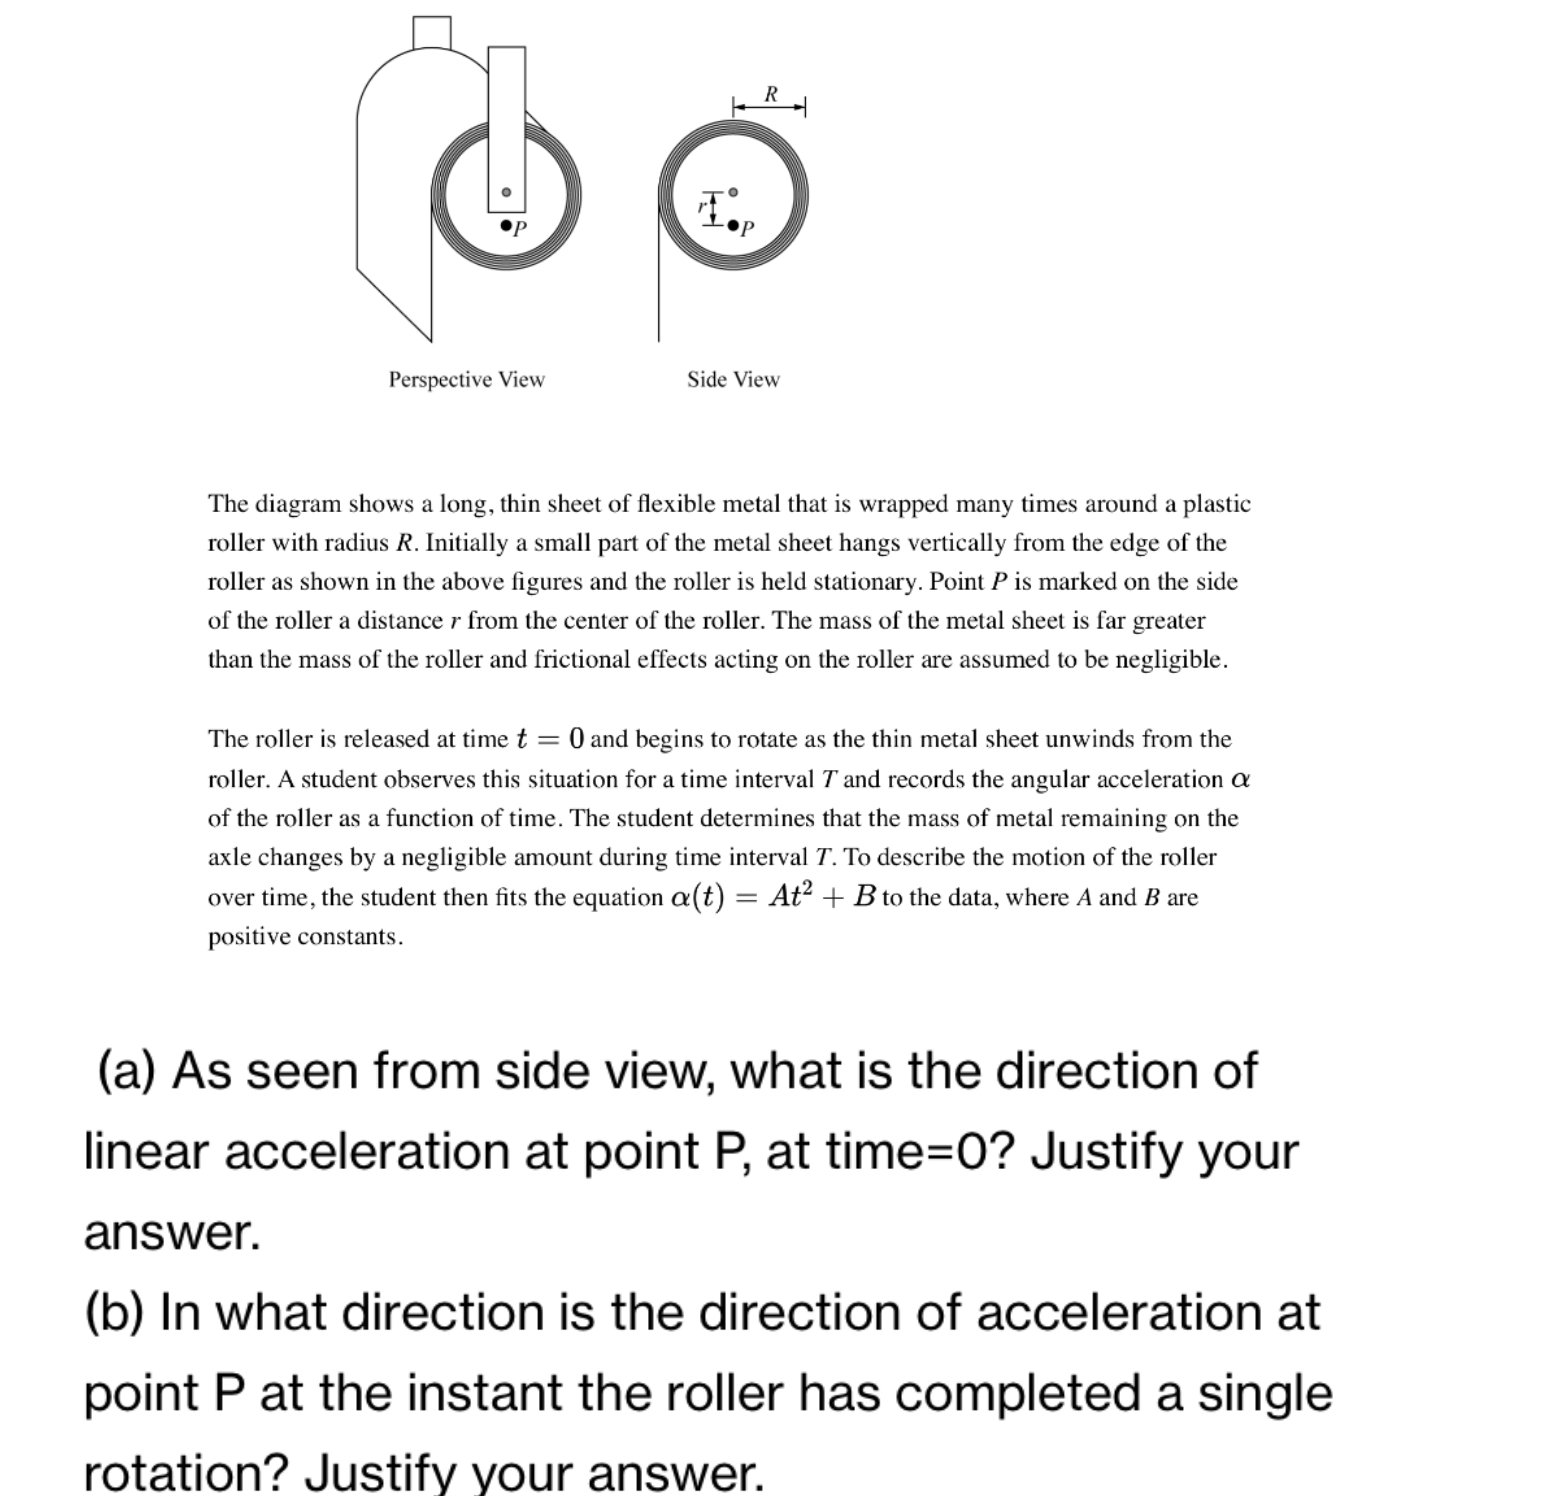 Posiive tonstams.
(a) As seen from side view, what is the direction of
linear acceleration at point P, at time=0? Justify your
answer.
(b) In what direction is the direction of acceleration at
point P at the instant the roller has completed a single
rotation? Justify vour answer.
